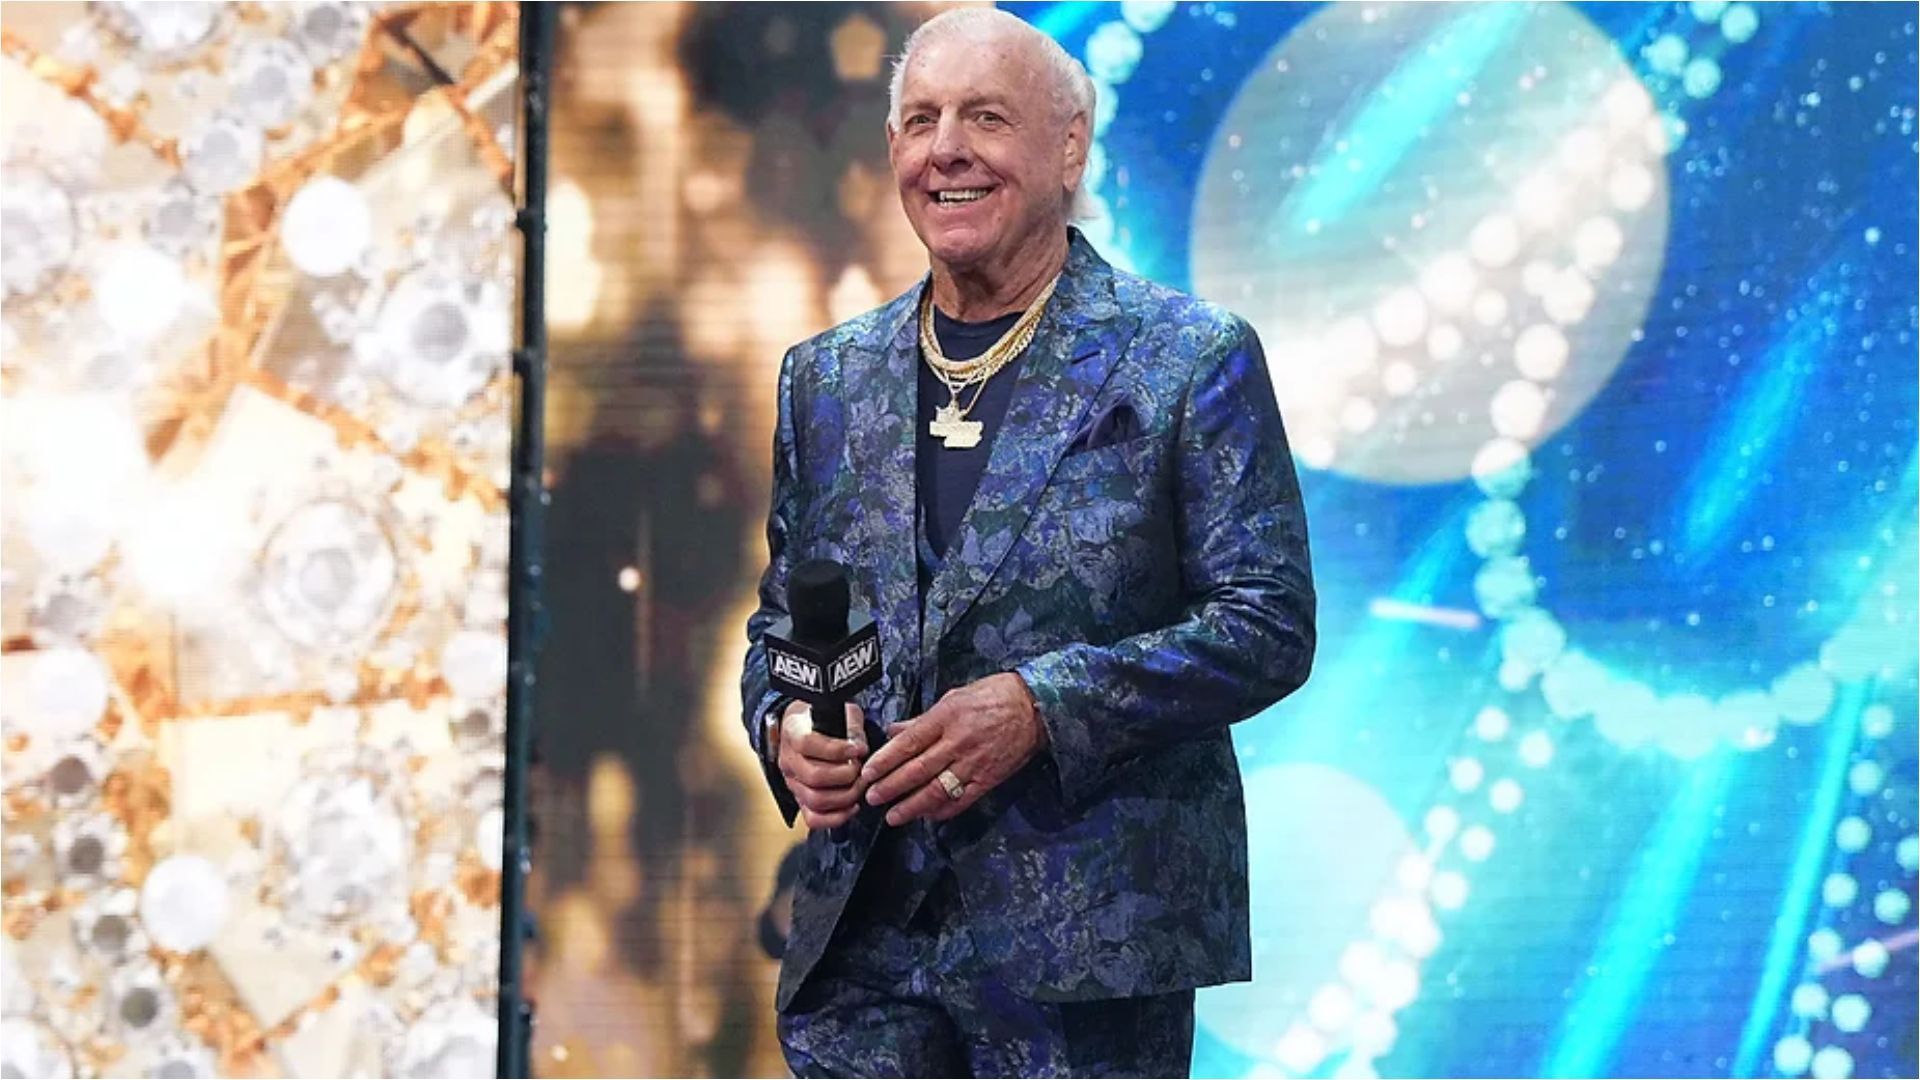 The Nature Boy recently signed a 4-year deal with AEW